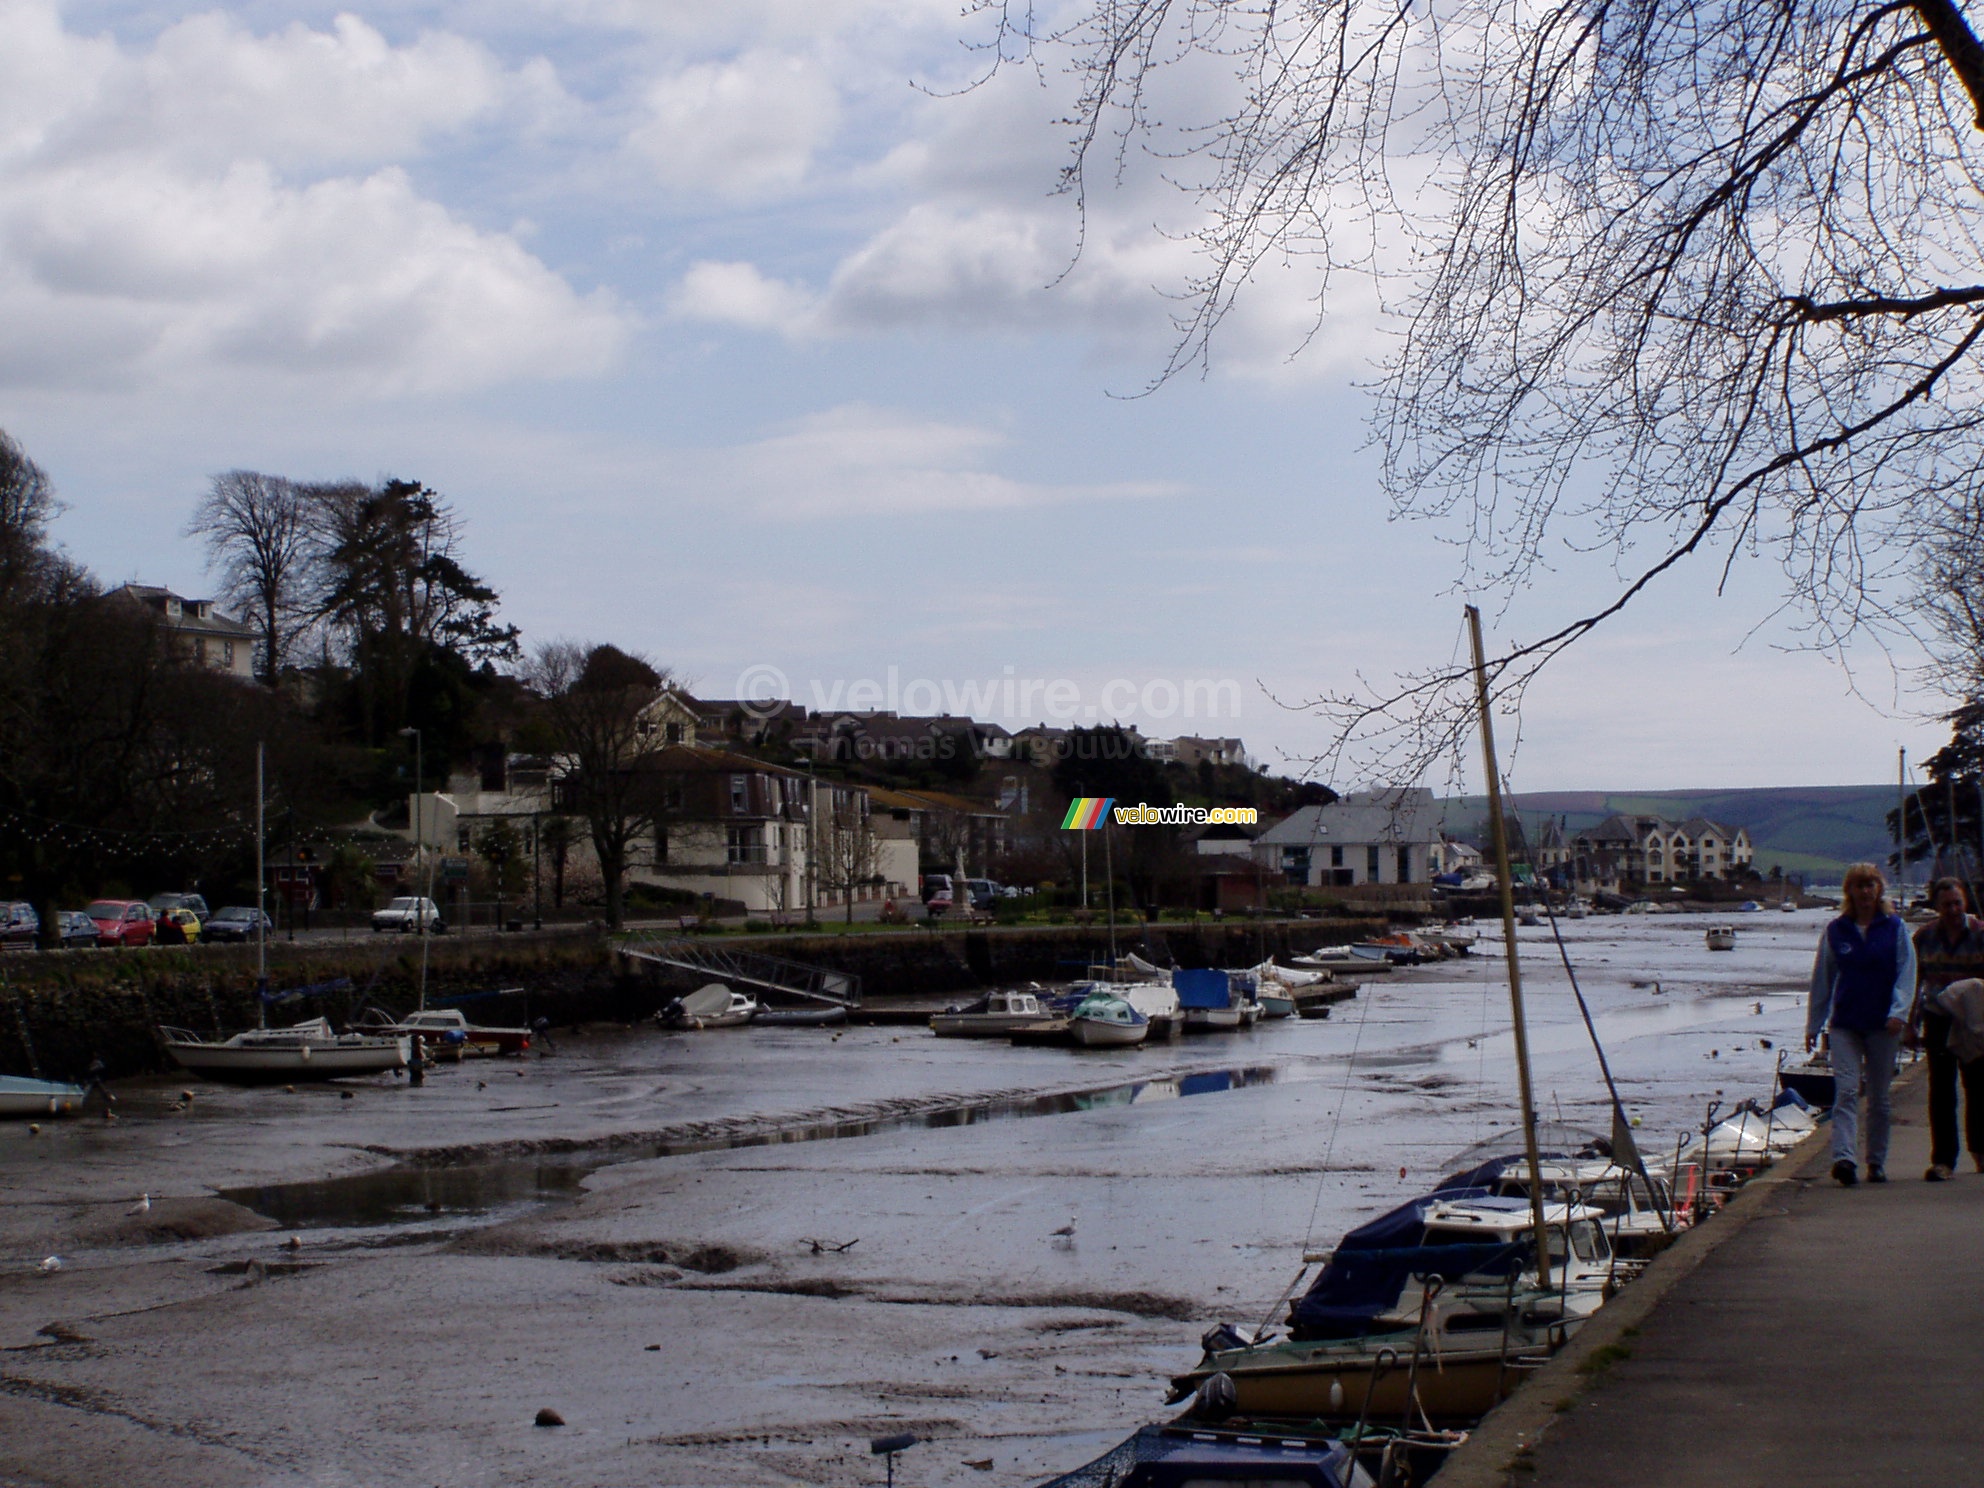 The harbour of Kingsbridge (without water)